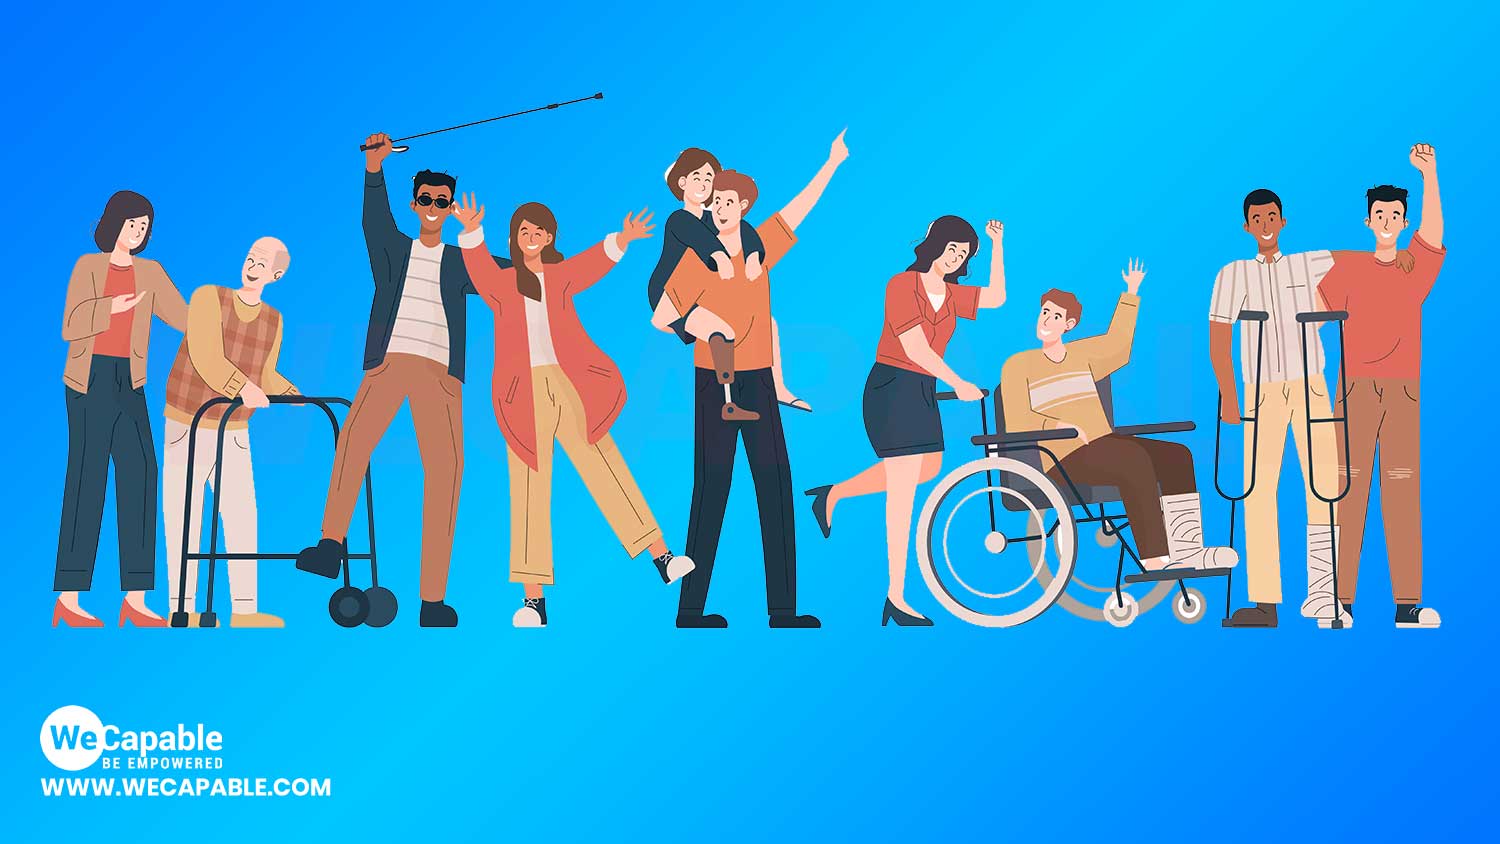 a vector image showing a group of happy persons with disabilities